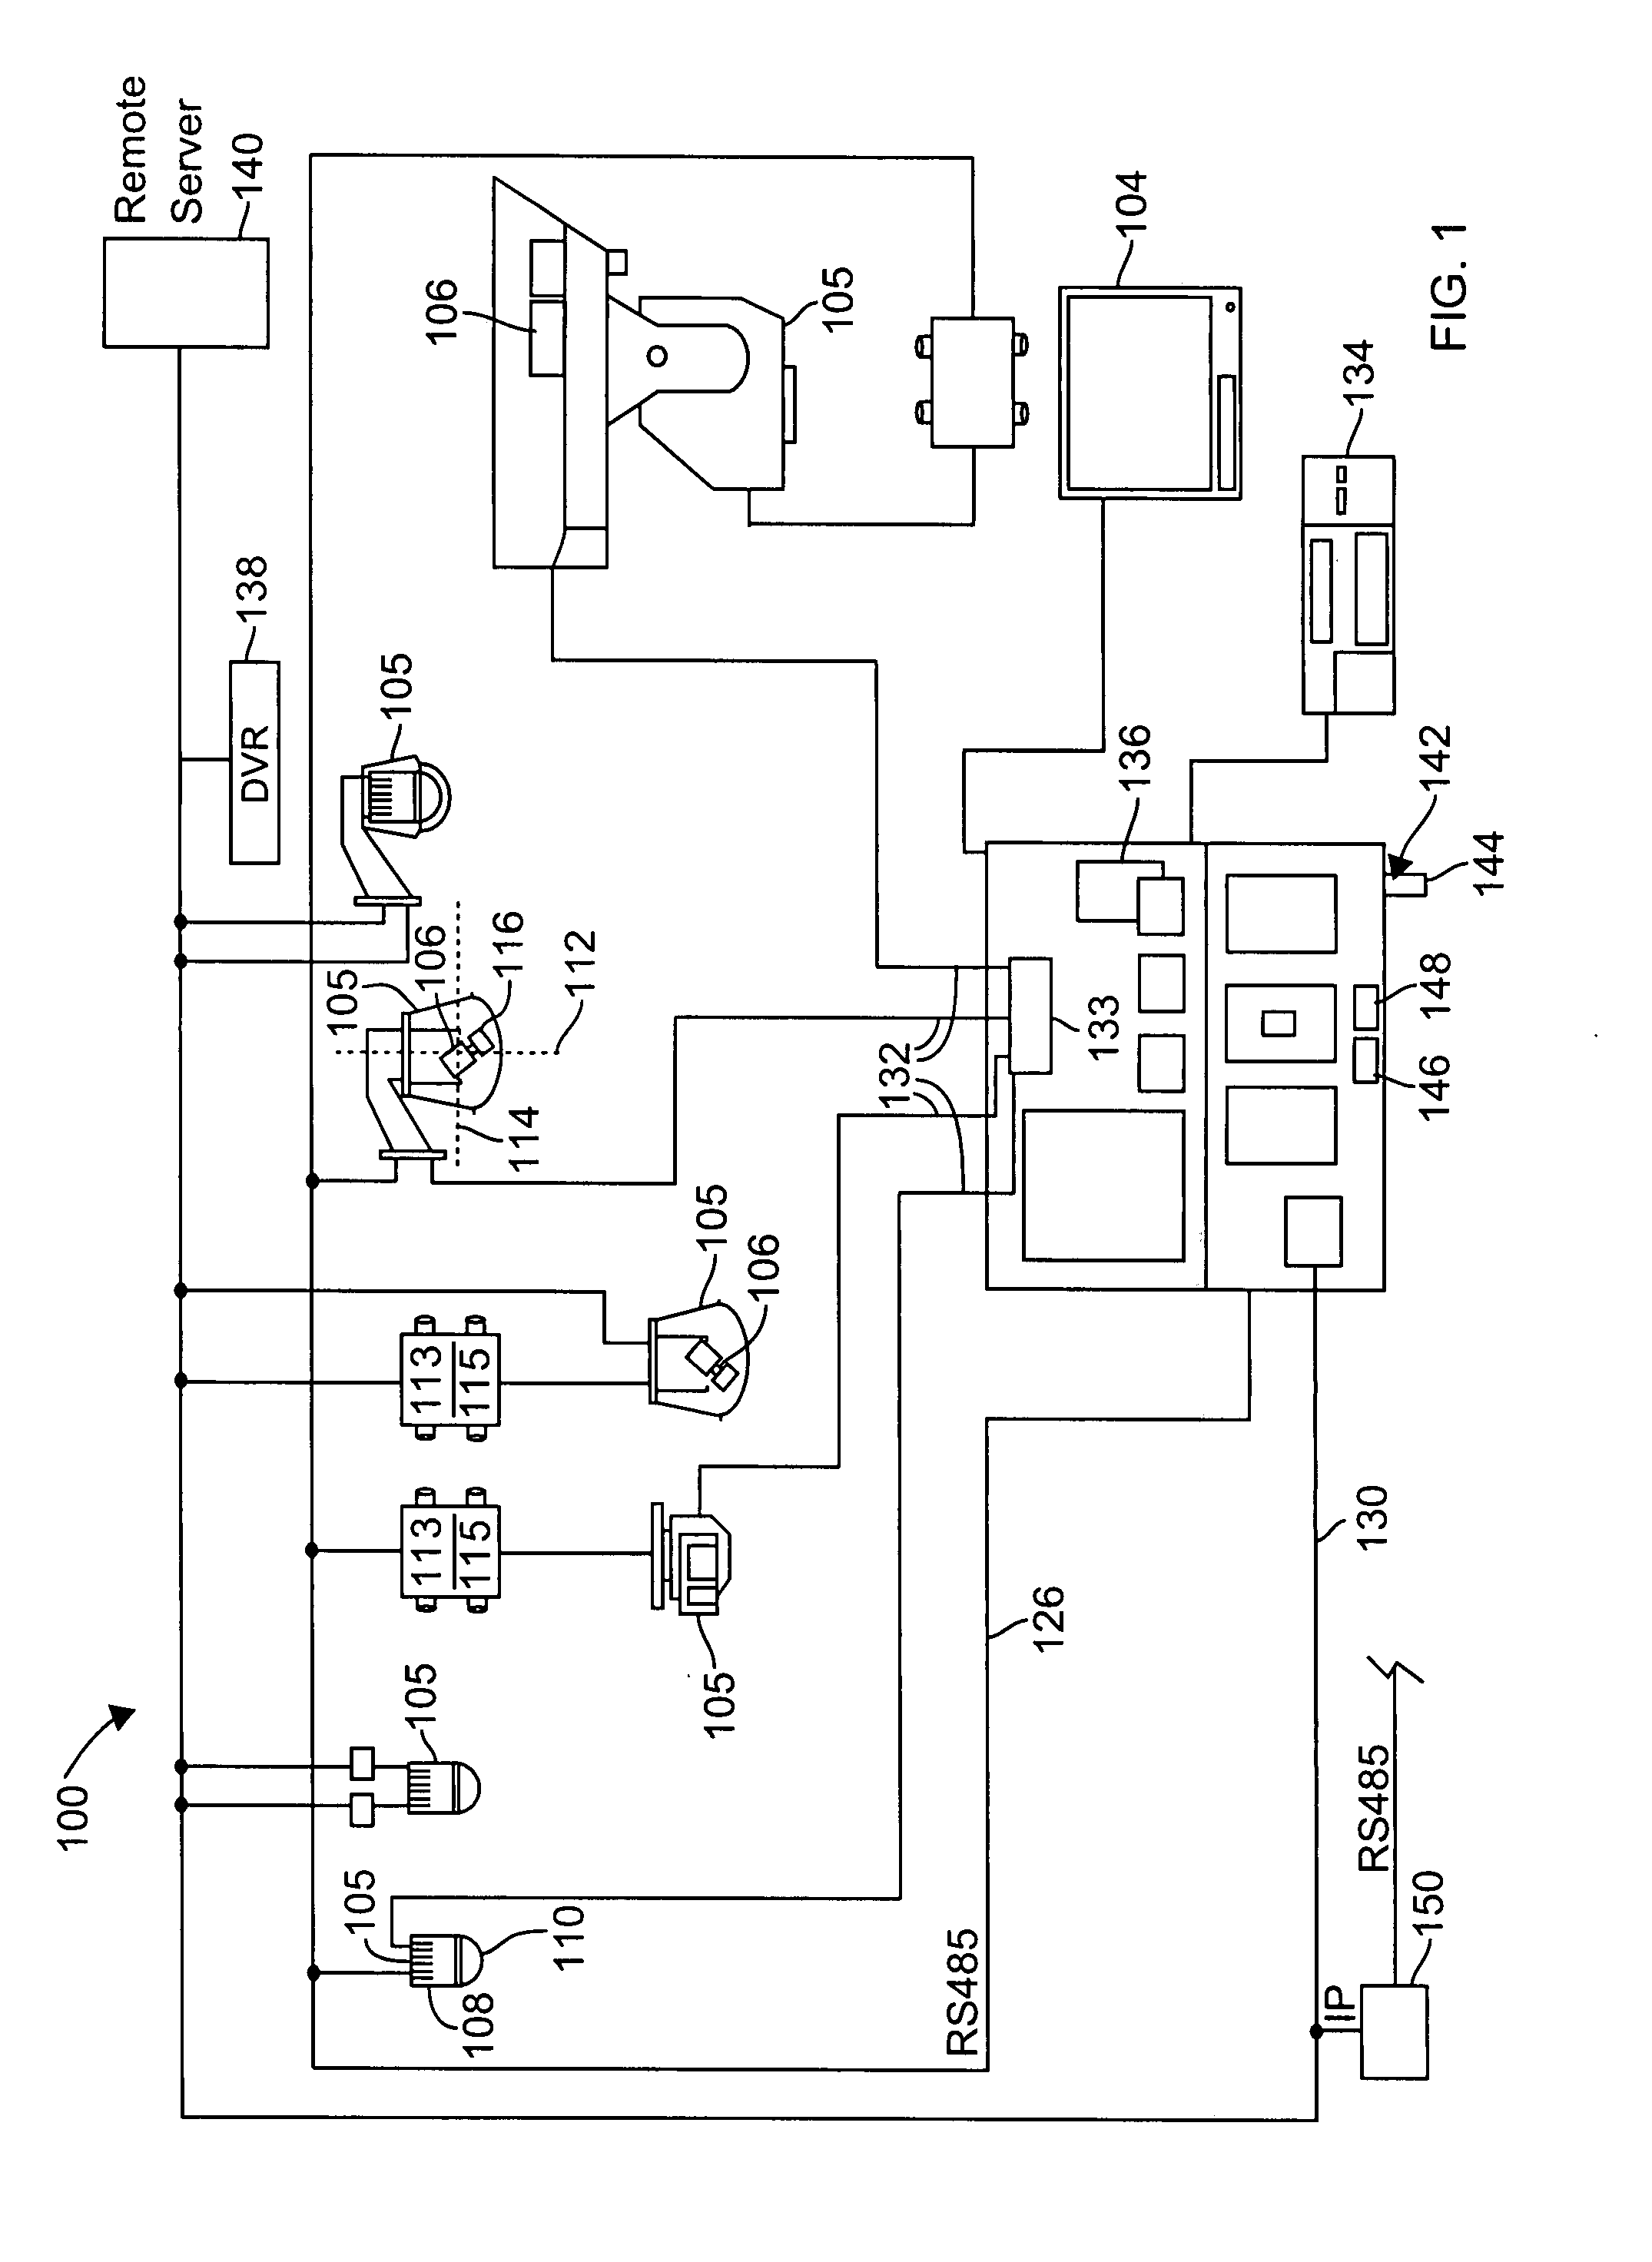 Methods and systems for operating a video surveillance system